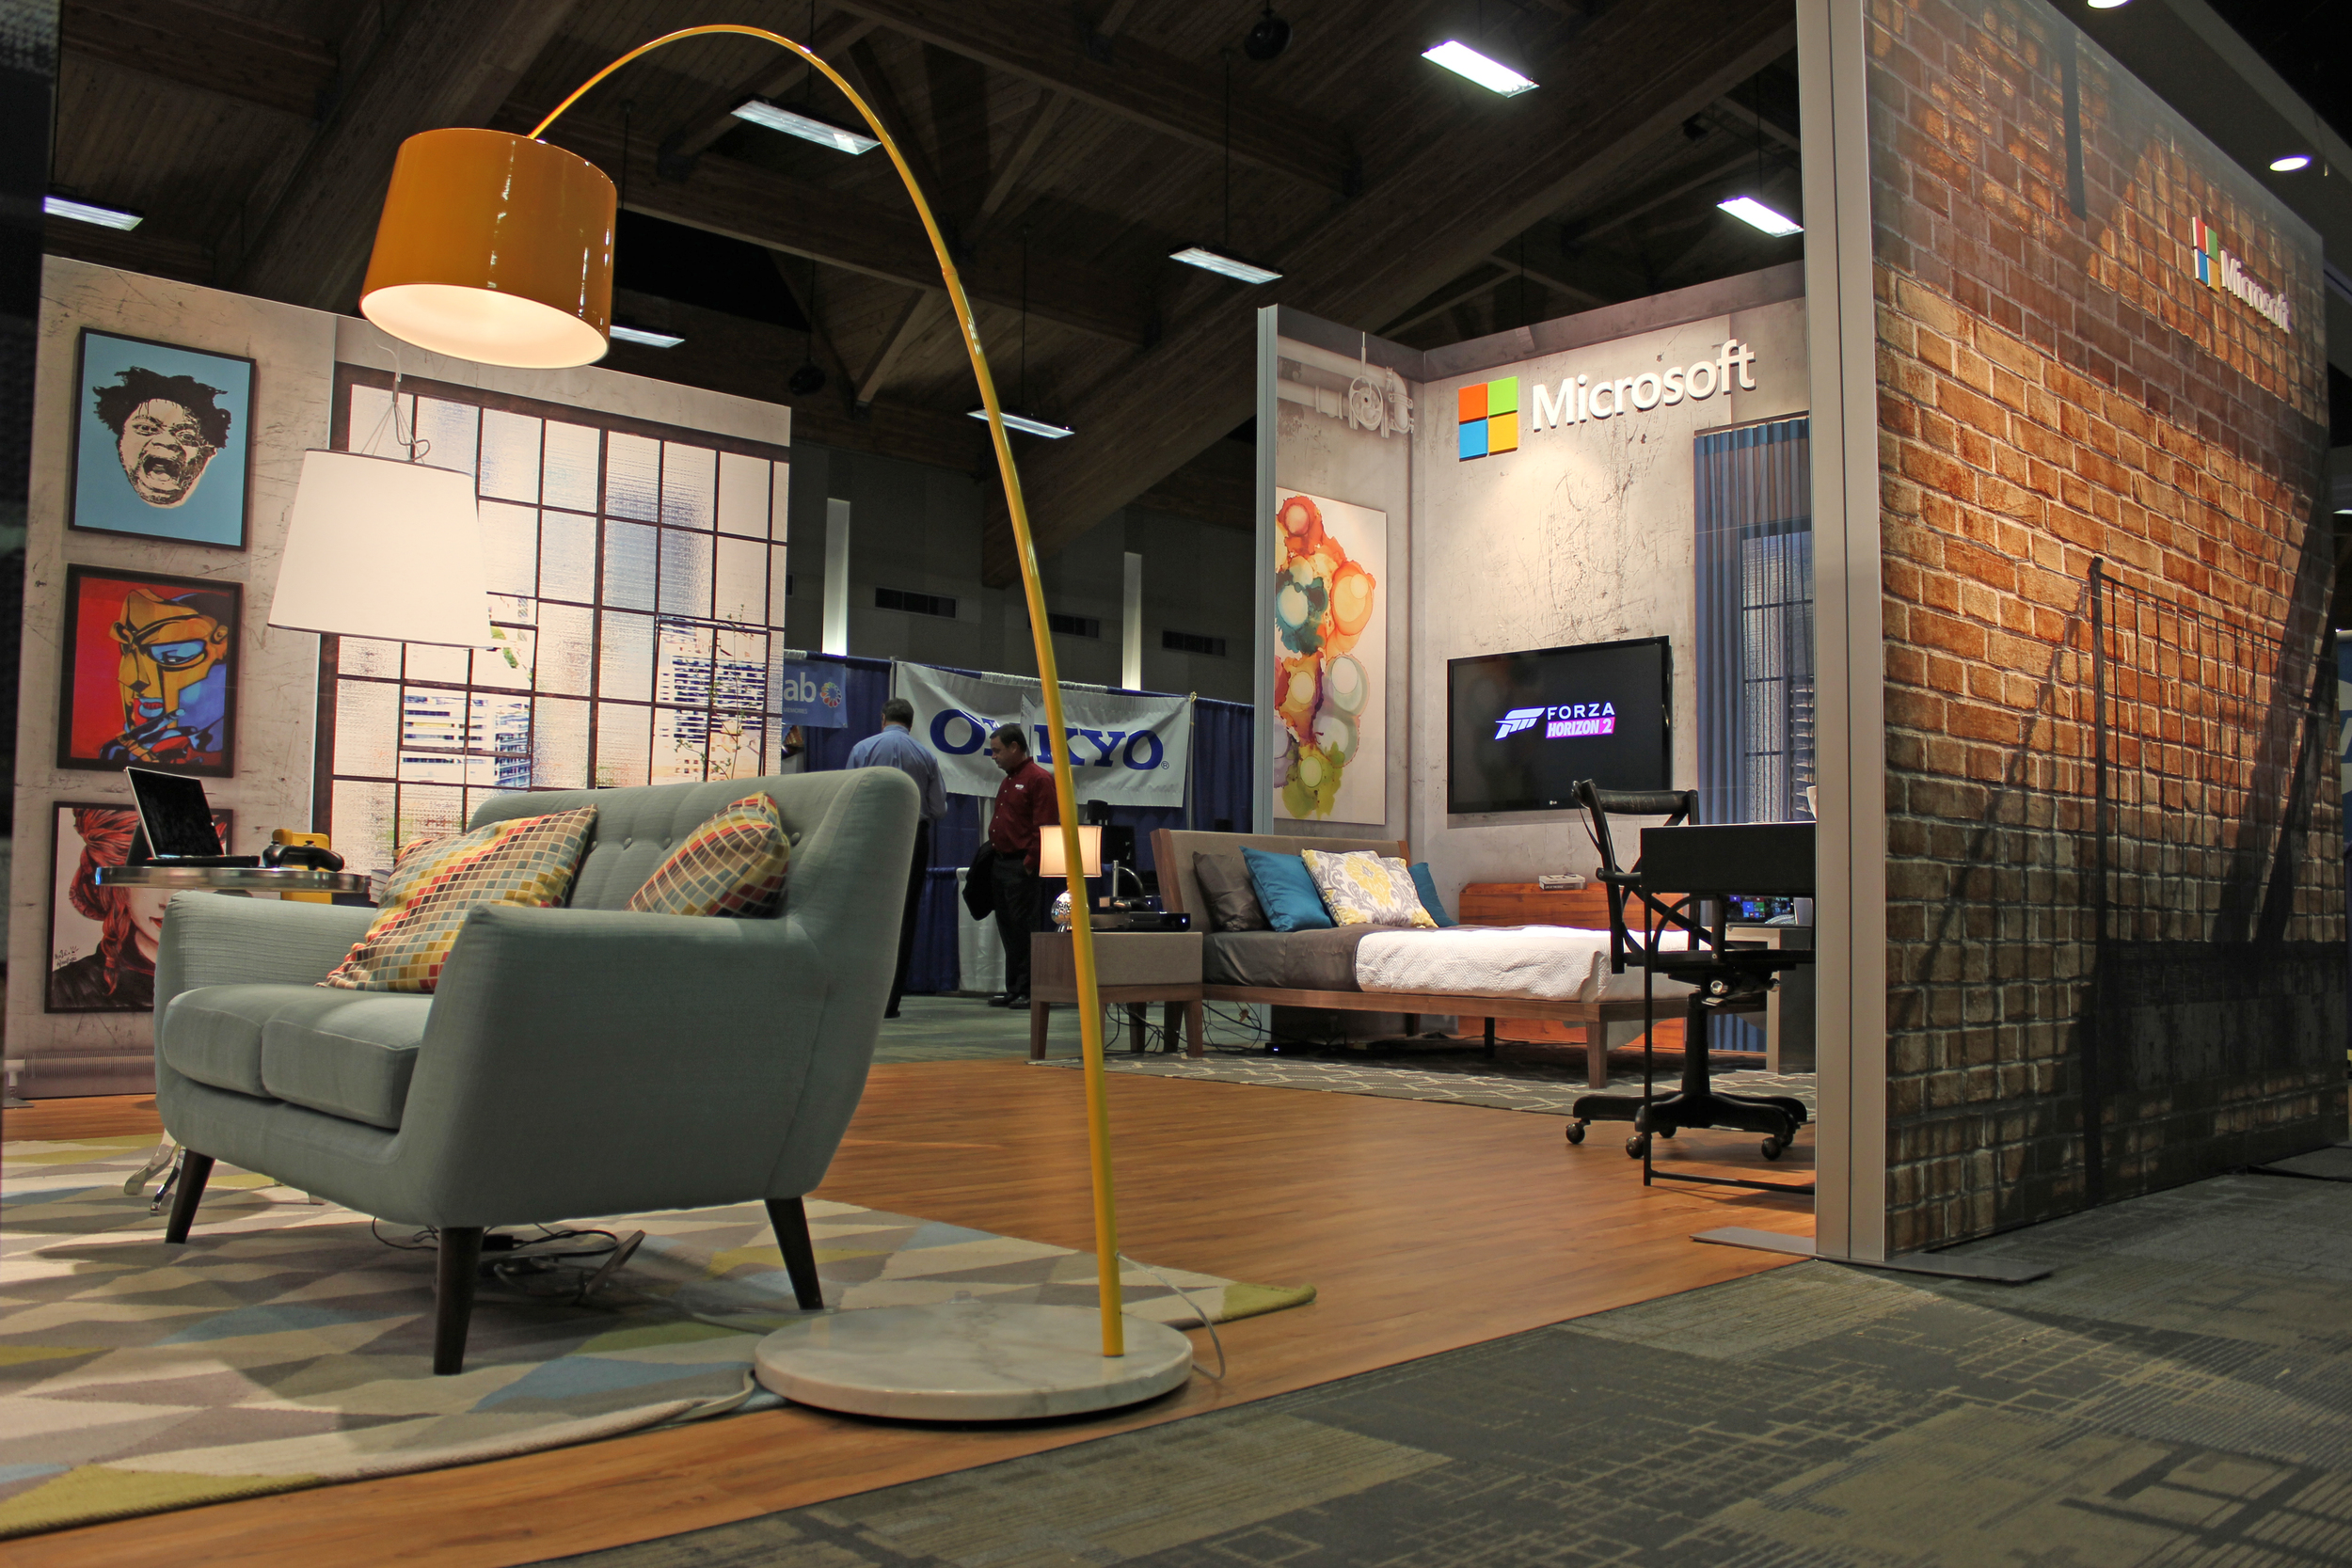 Large digitally printed graphics, wood flooring, and designer staging allows Microsoft to showcase product in an experiential way